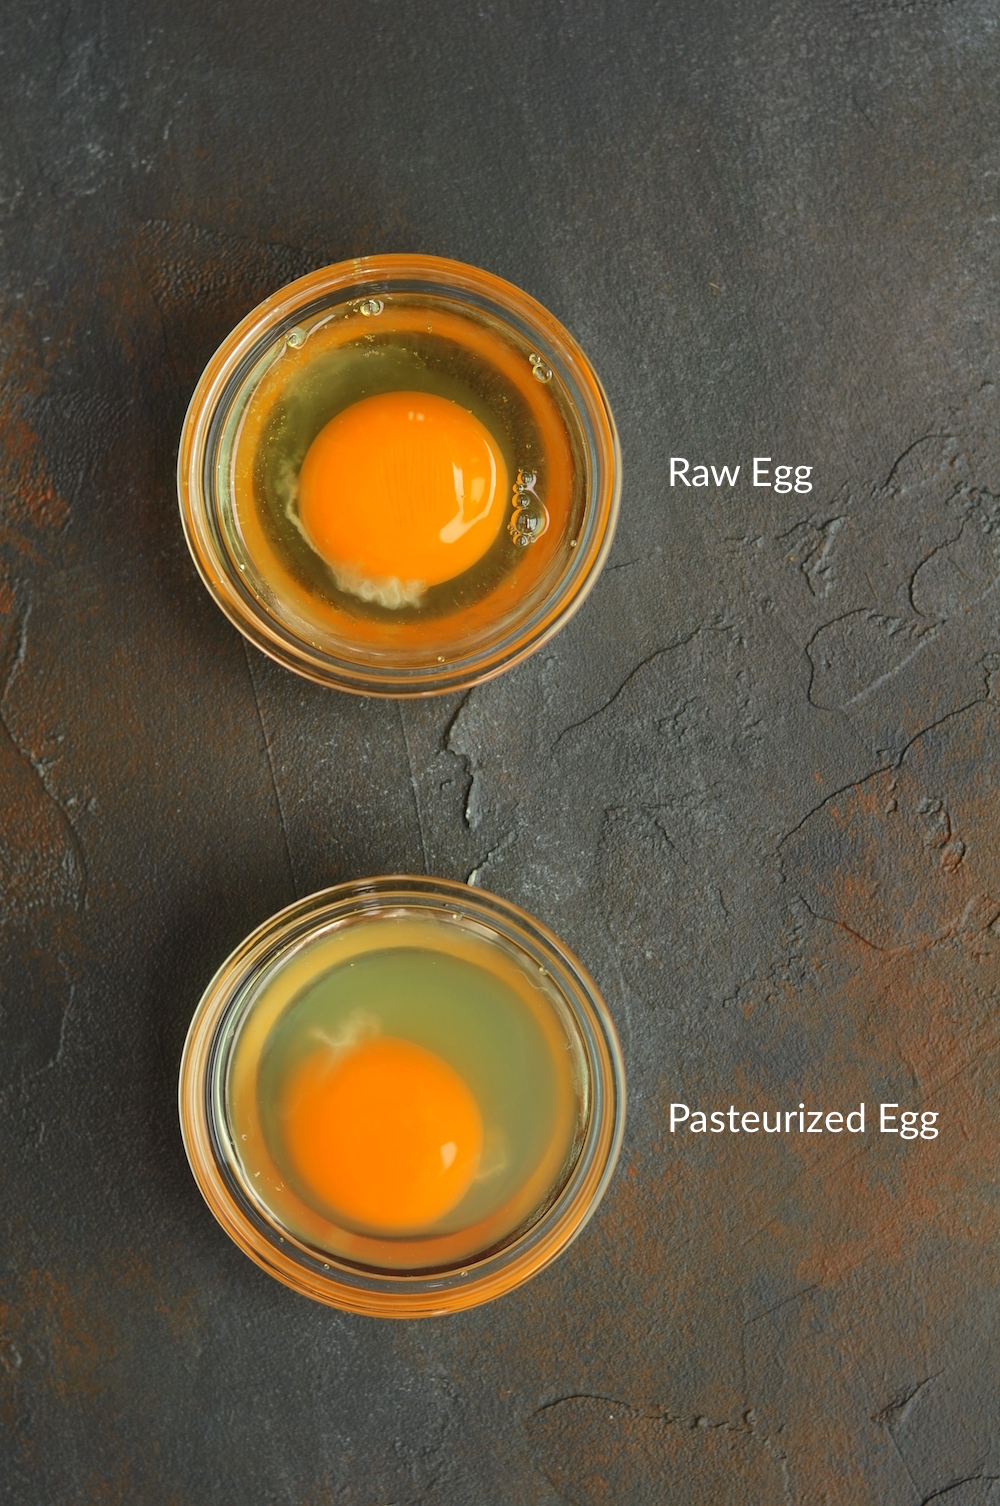 Raw egg and pasteurized egg white comparison